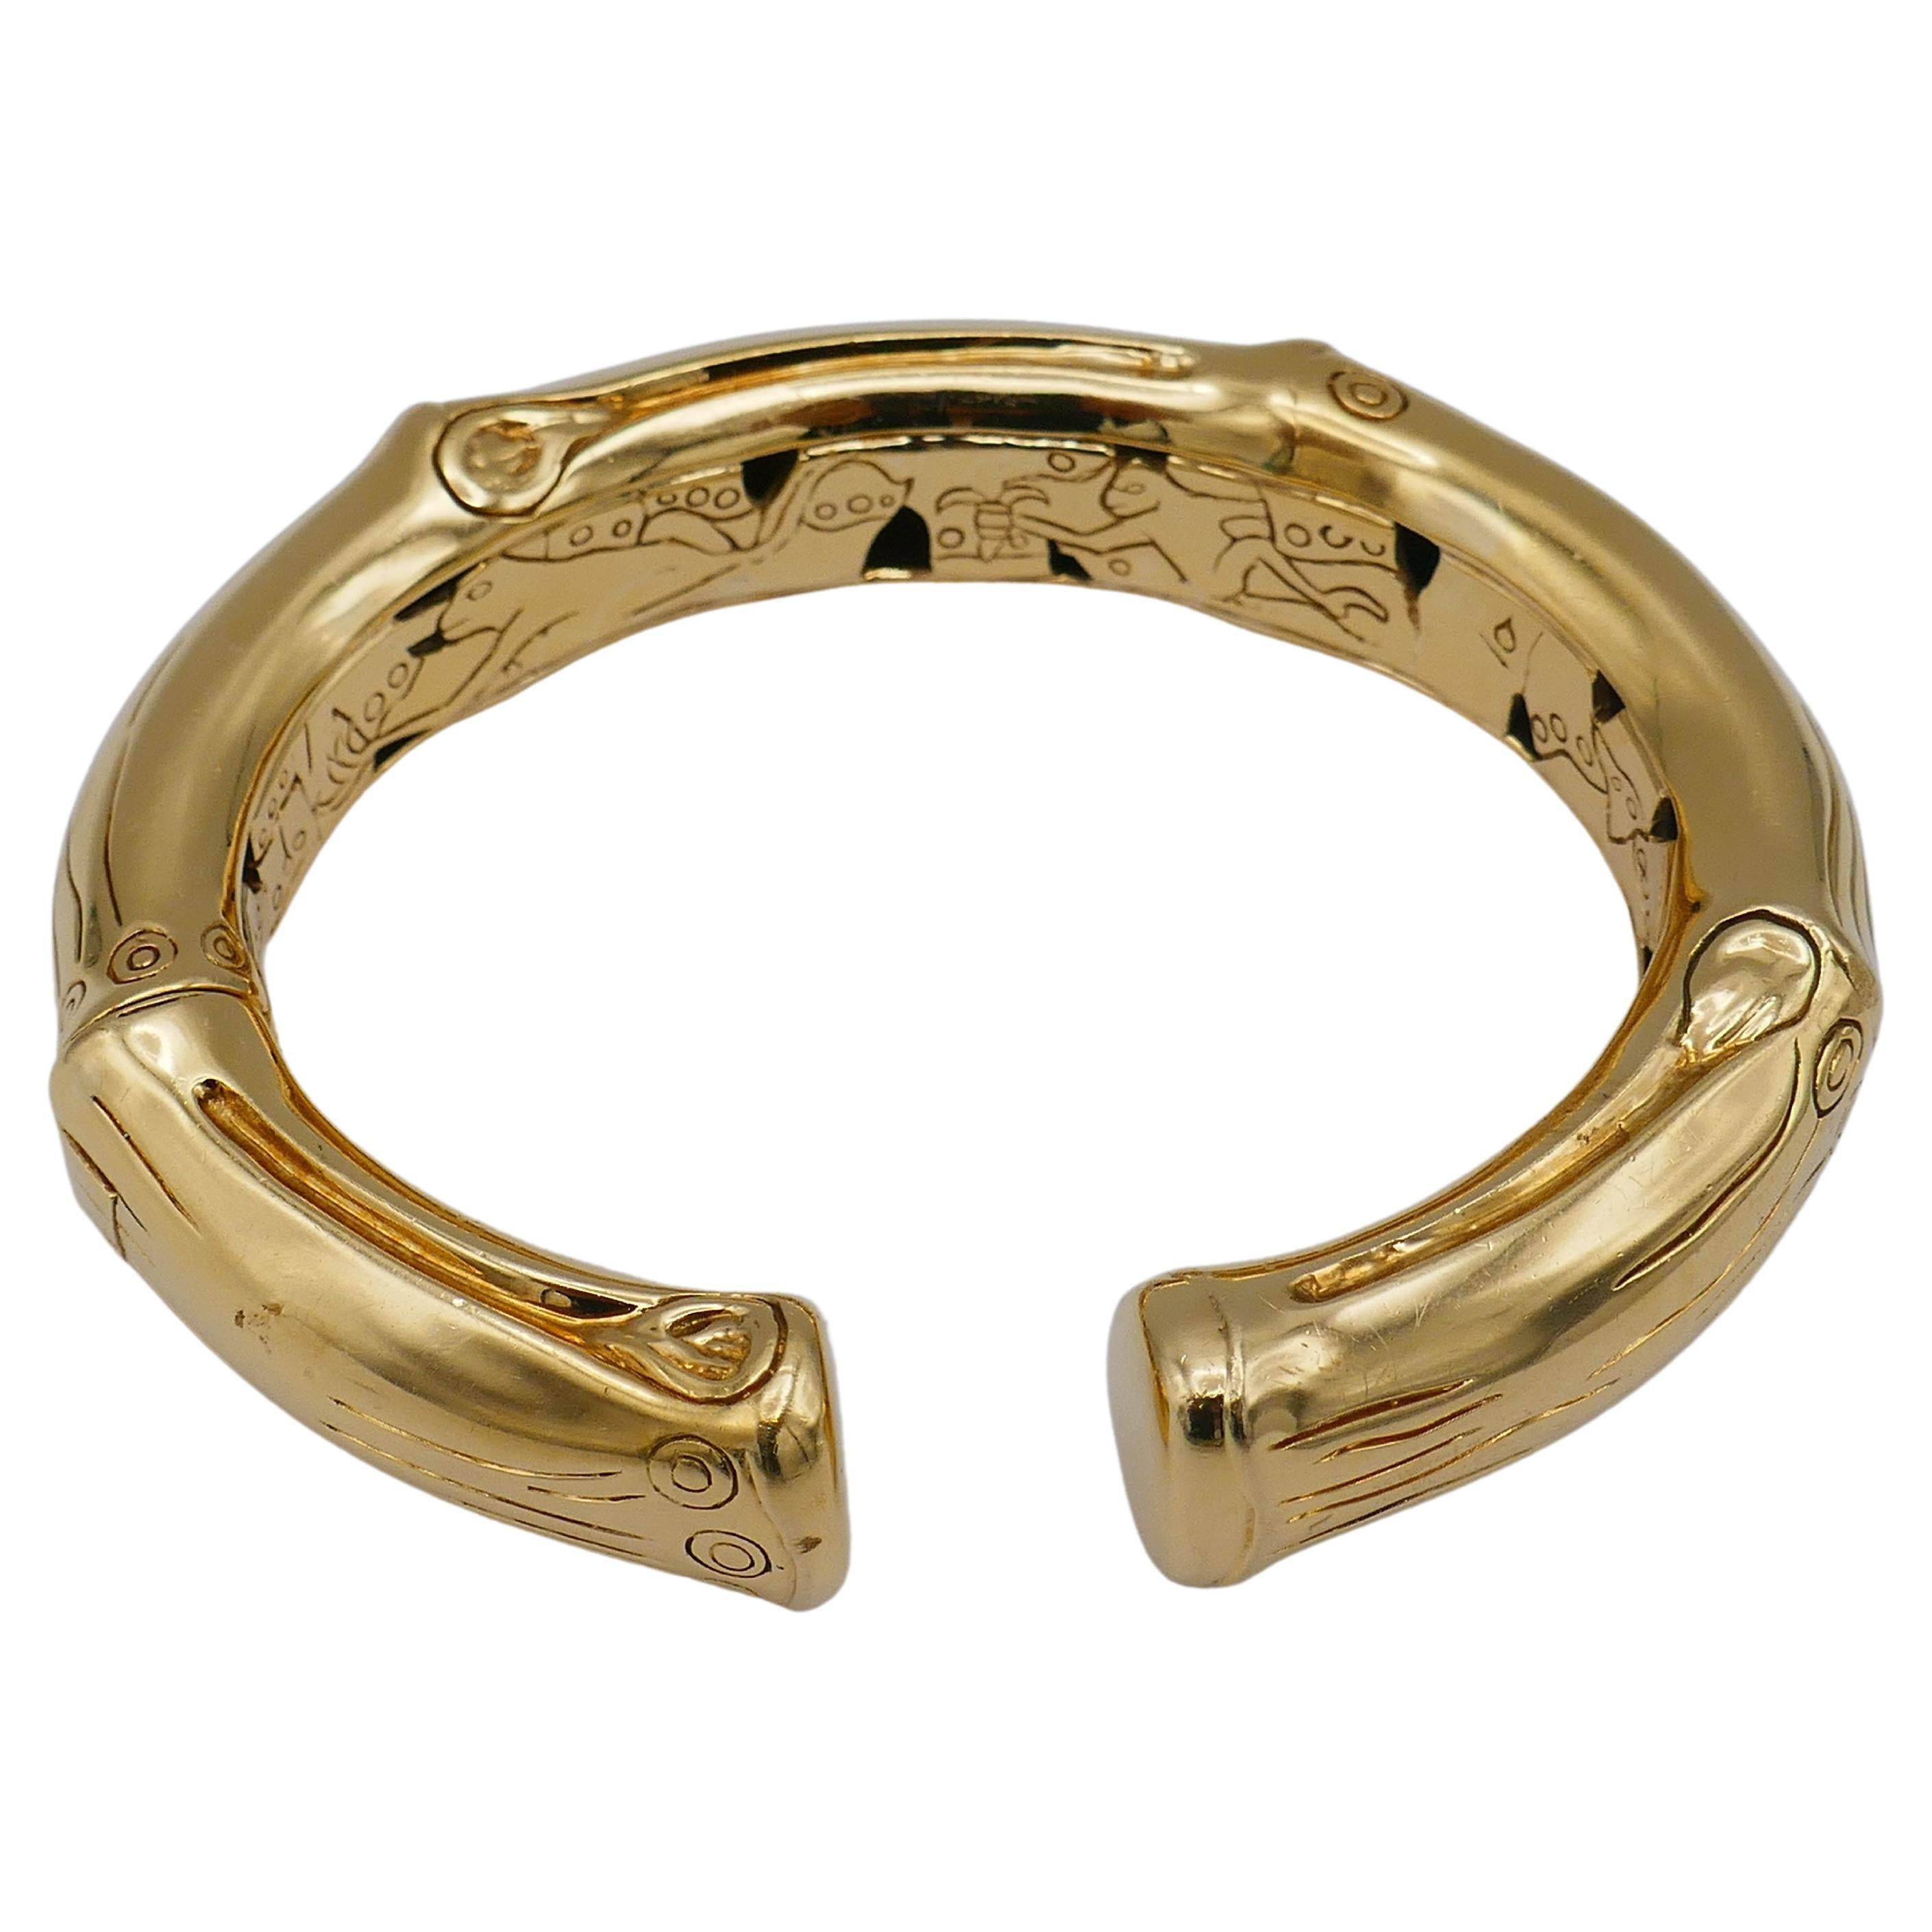 A shiny chunky 18k gold bracelet by John Hardy from the Bamboo collection. 
Handcrafted in Bali, this gold bracelet has an organic bamboo-like shape. 
A signature Hardy's design is applied to the exterior and inner part of the piece. The fine lines